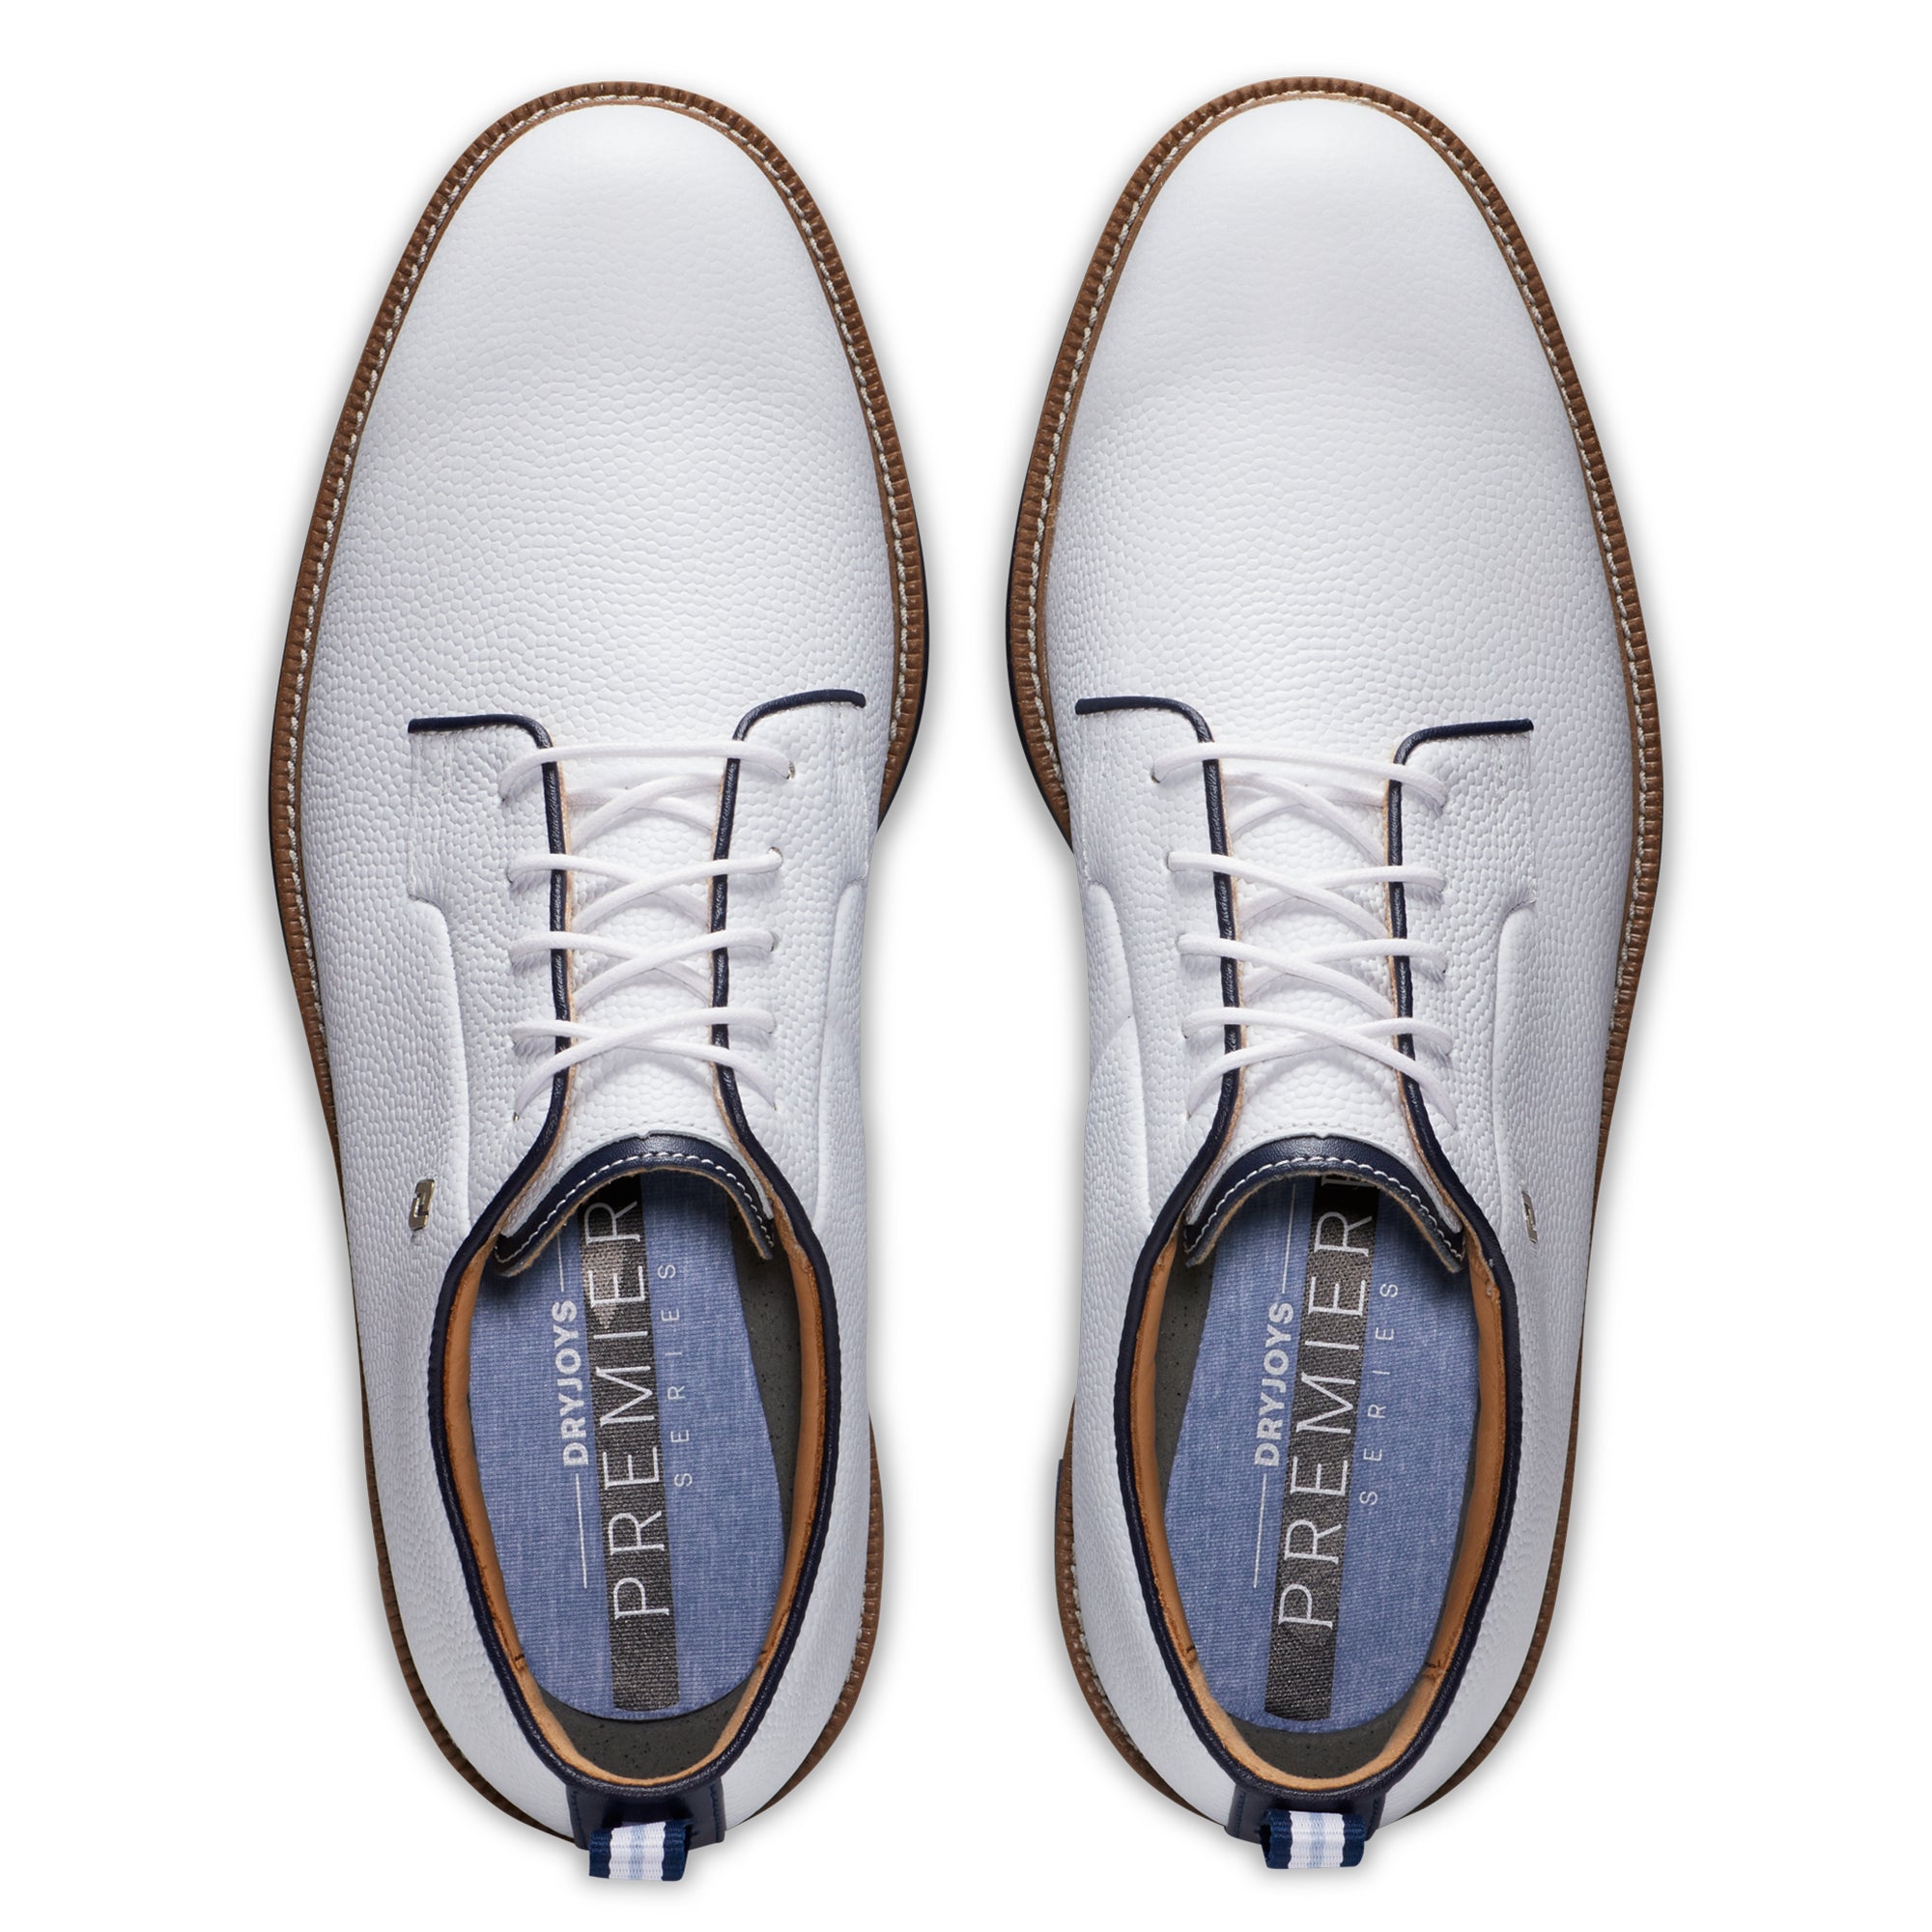 FootJoy Premiere Series Field Golf Shoes 54396 White Navy | Function18 ...